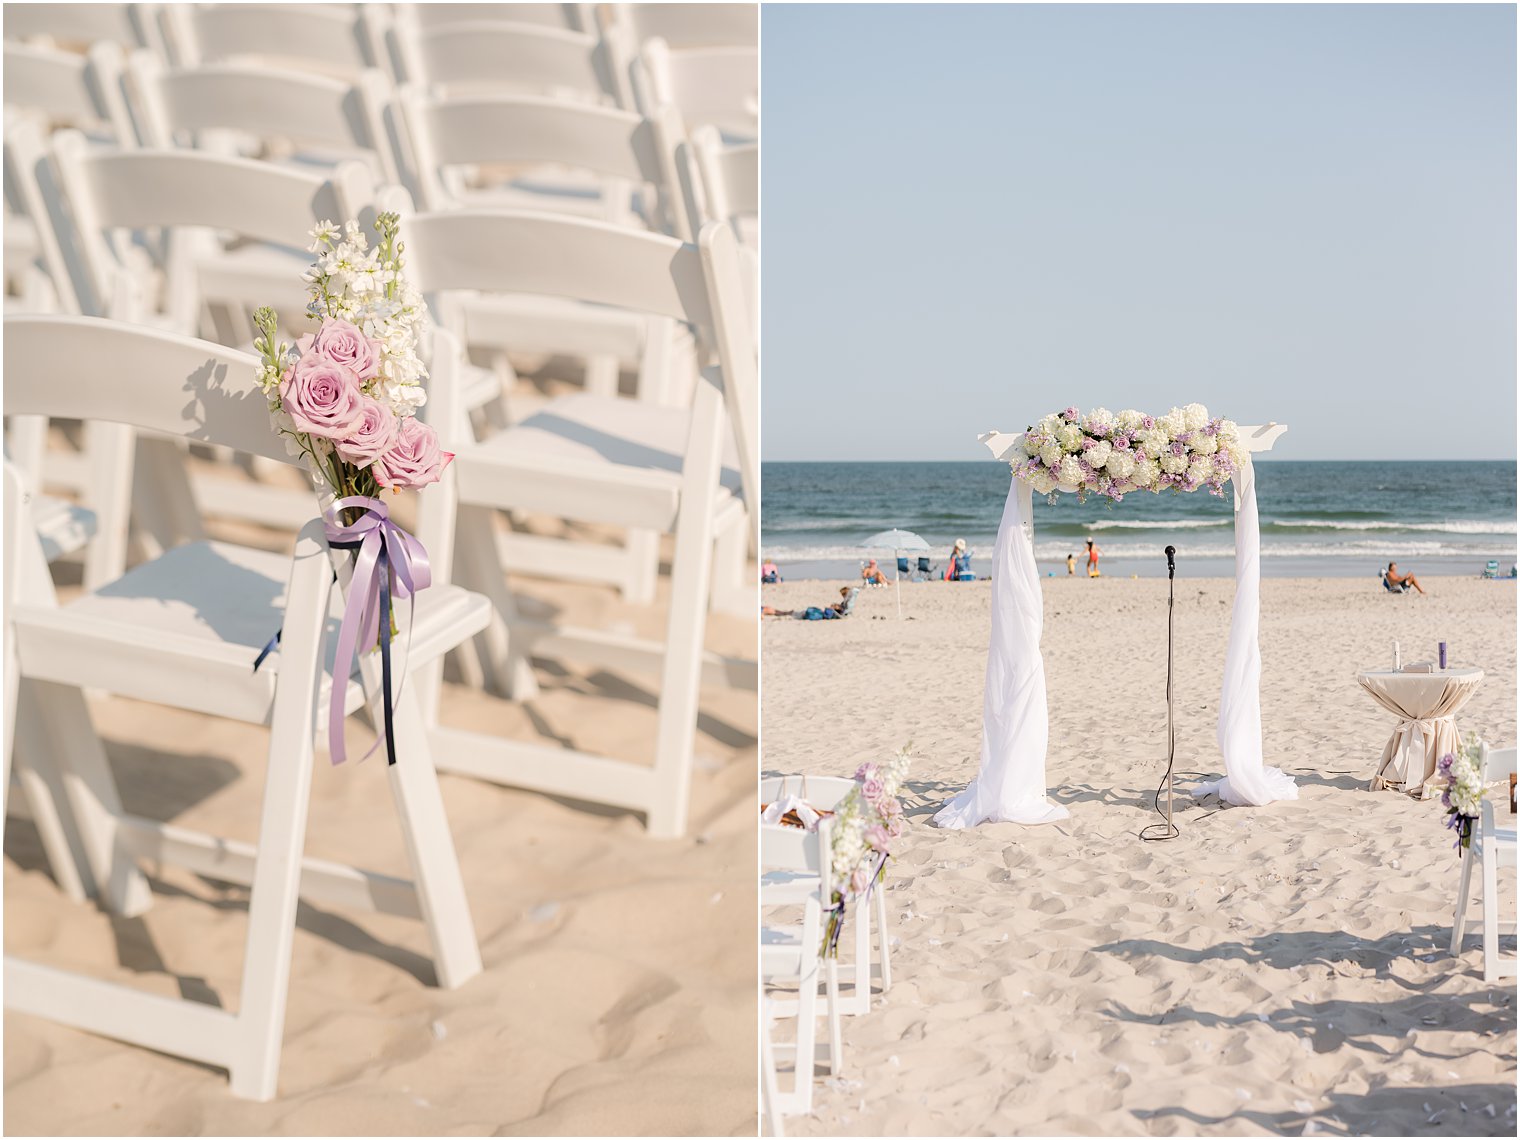 white arbor with purple and white flowers for beach wedding ceremony in Avalon NJ